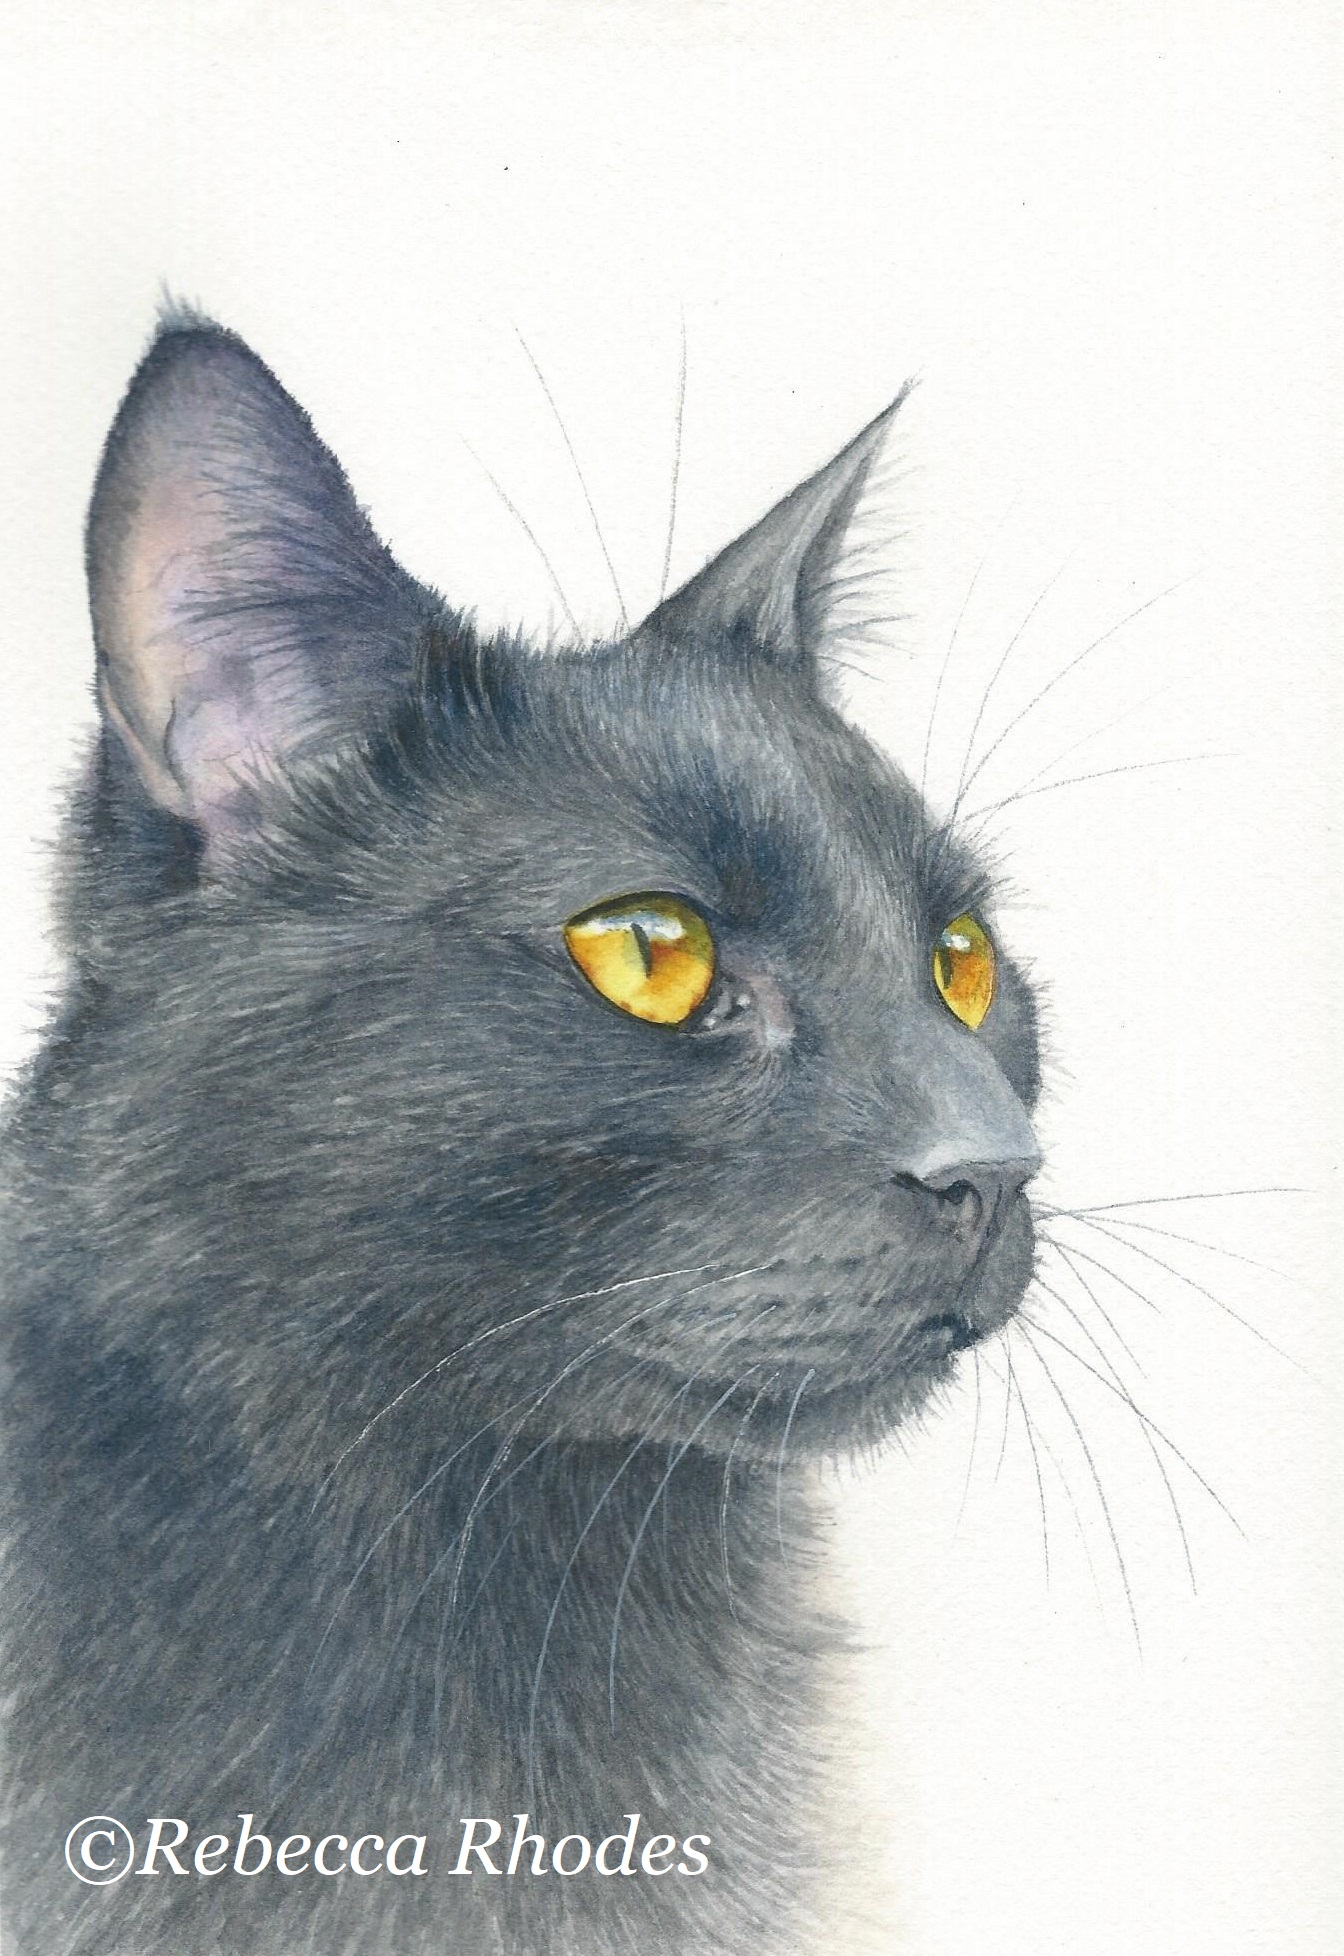 How to Paint a Black Cat in Watercolor - Rebecca Rhodes